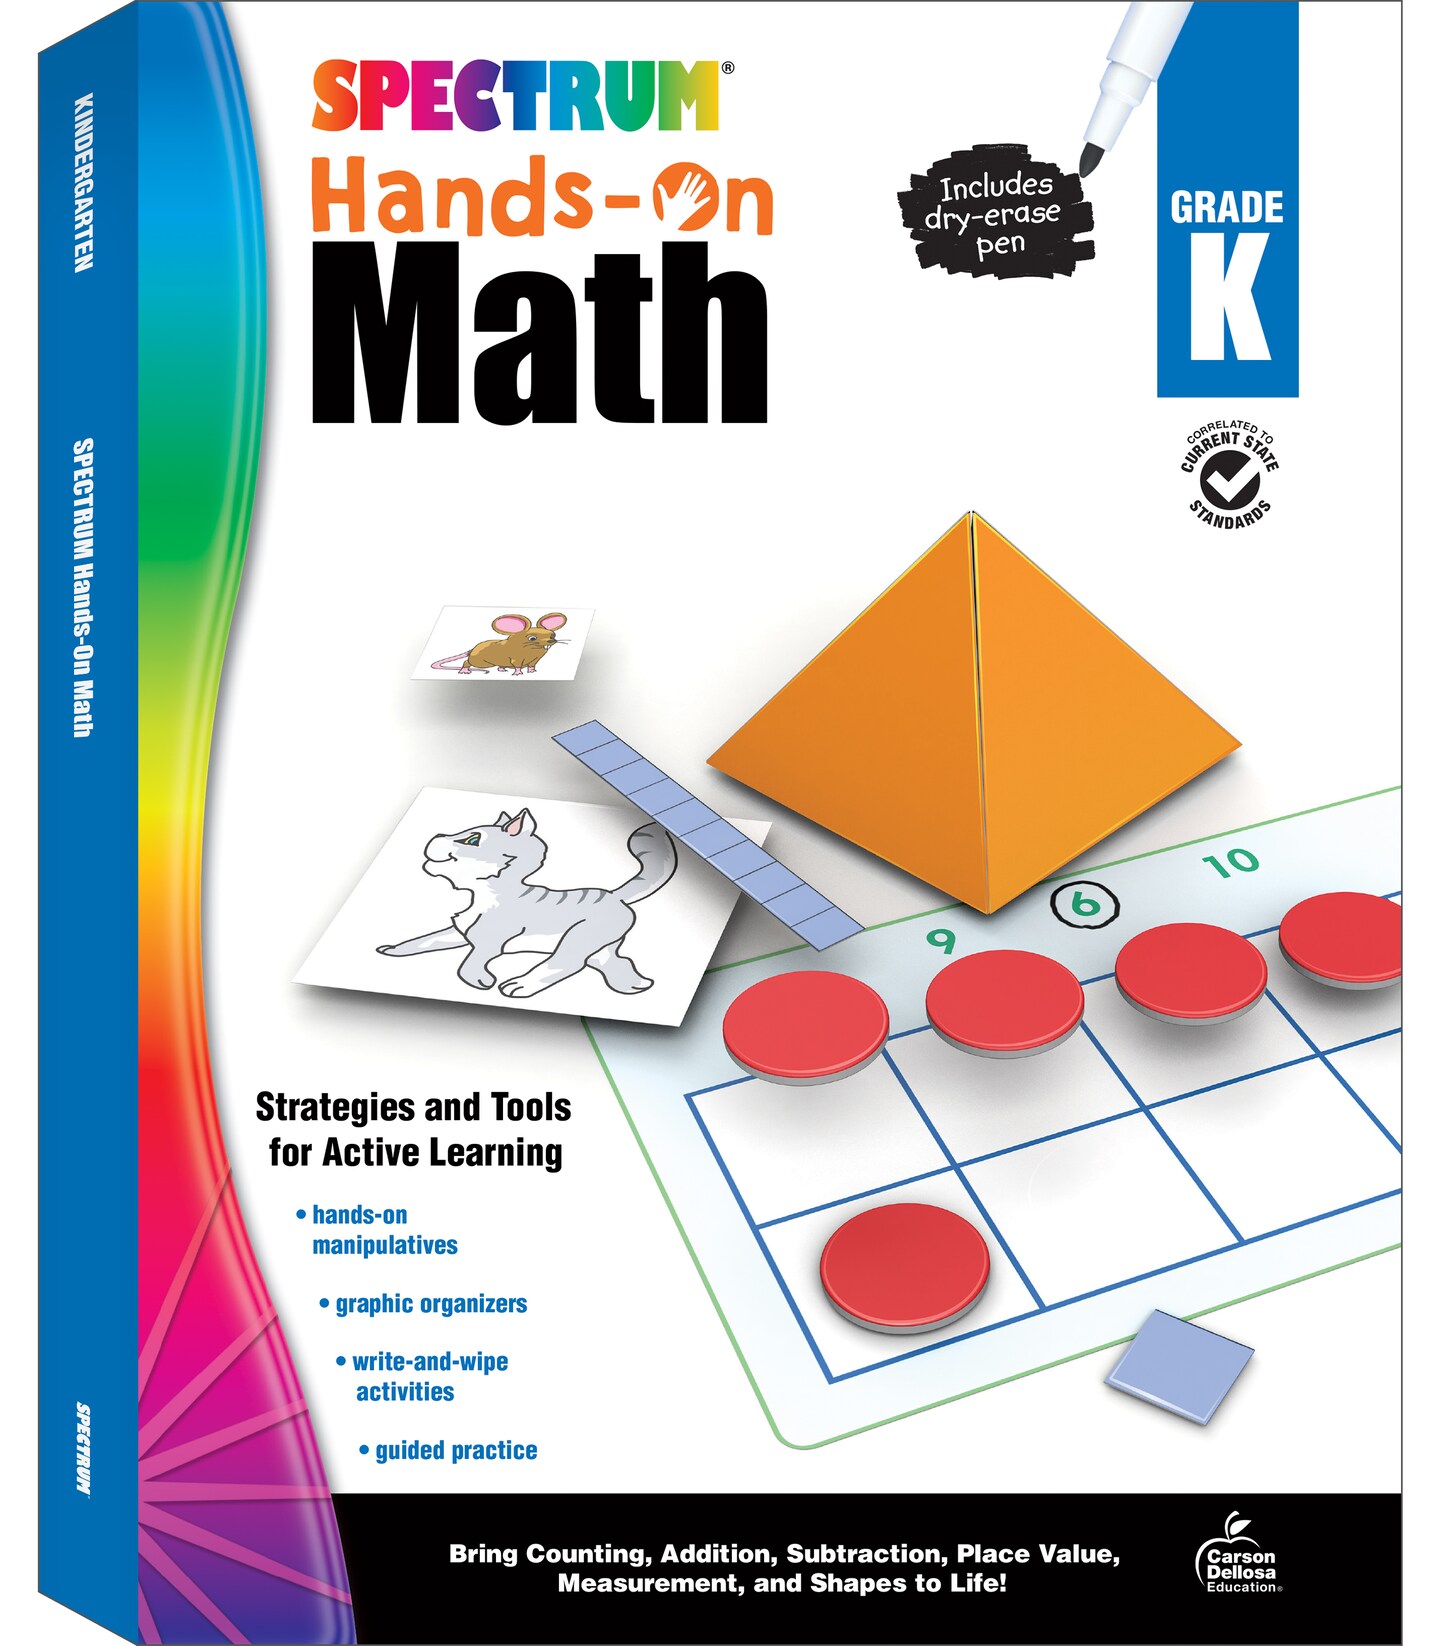 Spectrum Kindergarten Hands-On Math Workbook, Ages 5 to 6, Hands-On Math for Kindergarten, Dry Erase Counting, Addition, Subtraction, and Place Value Math Activities With Dry Erase Pen - 96 Pages